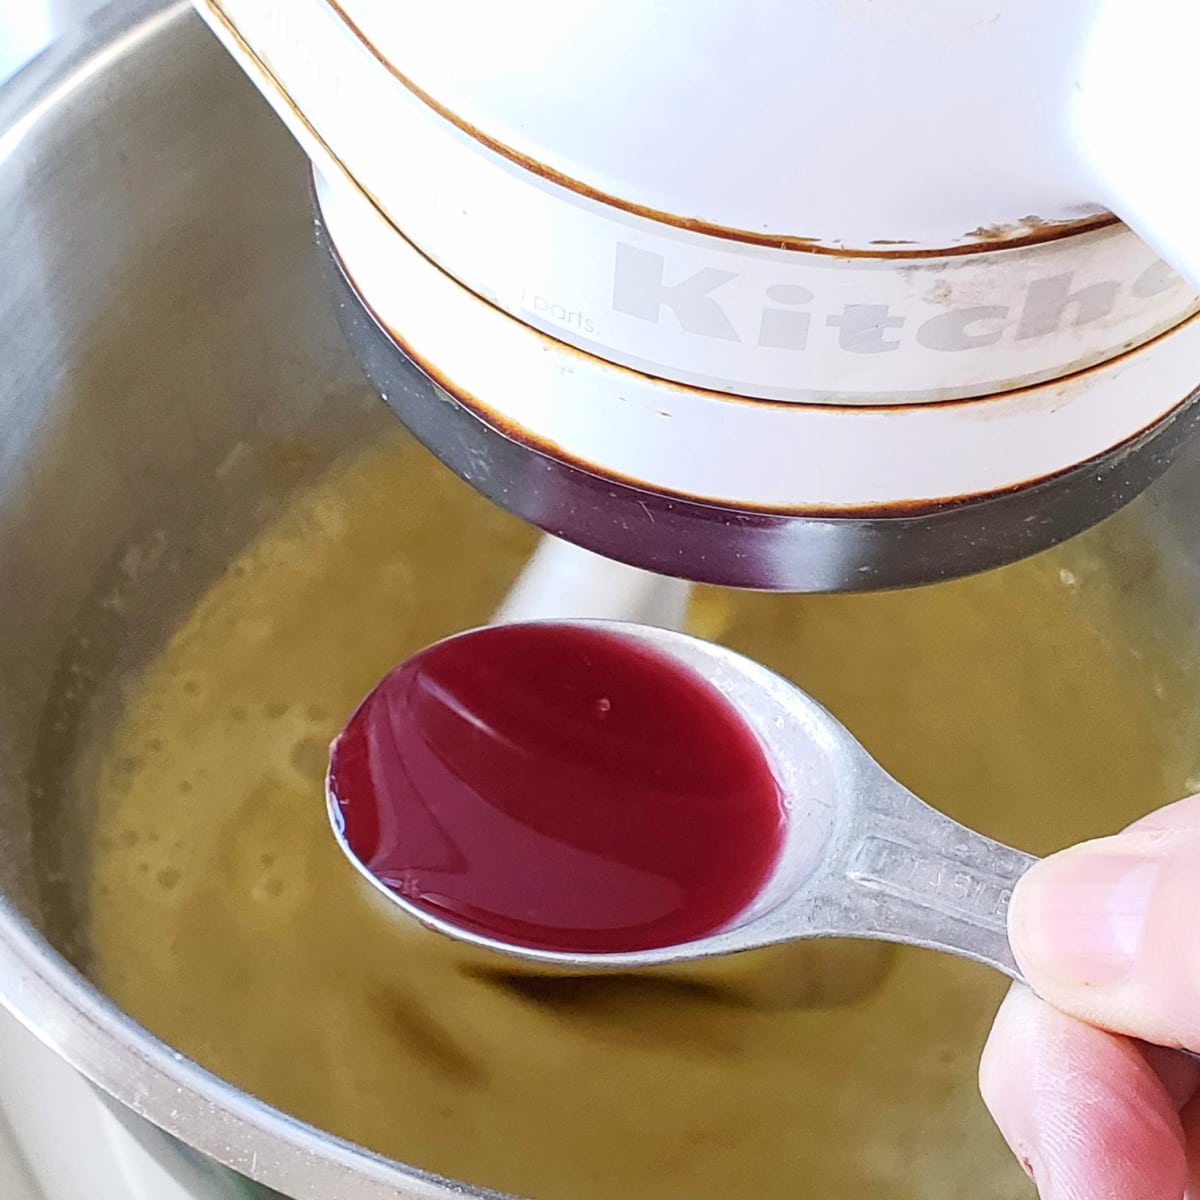 Blood orange juice in a measuring spoon being added to cake batter